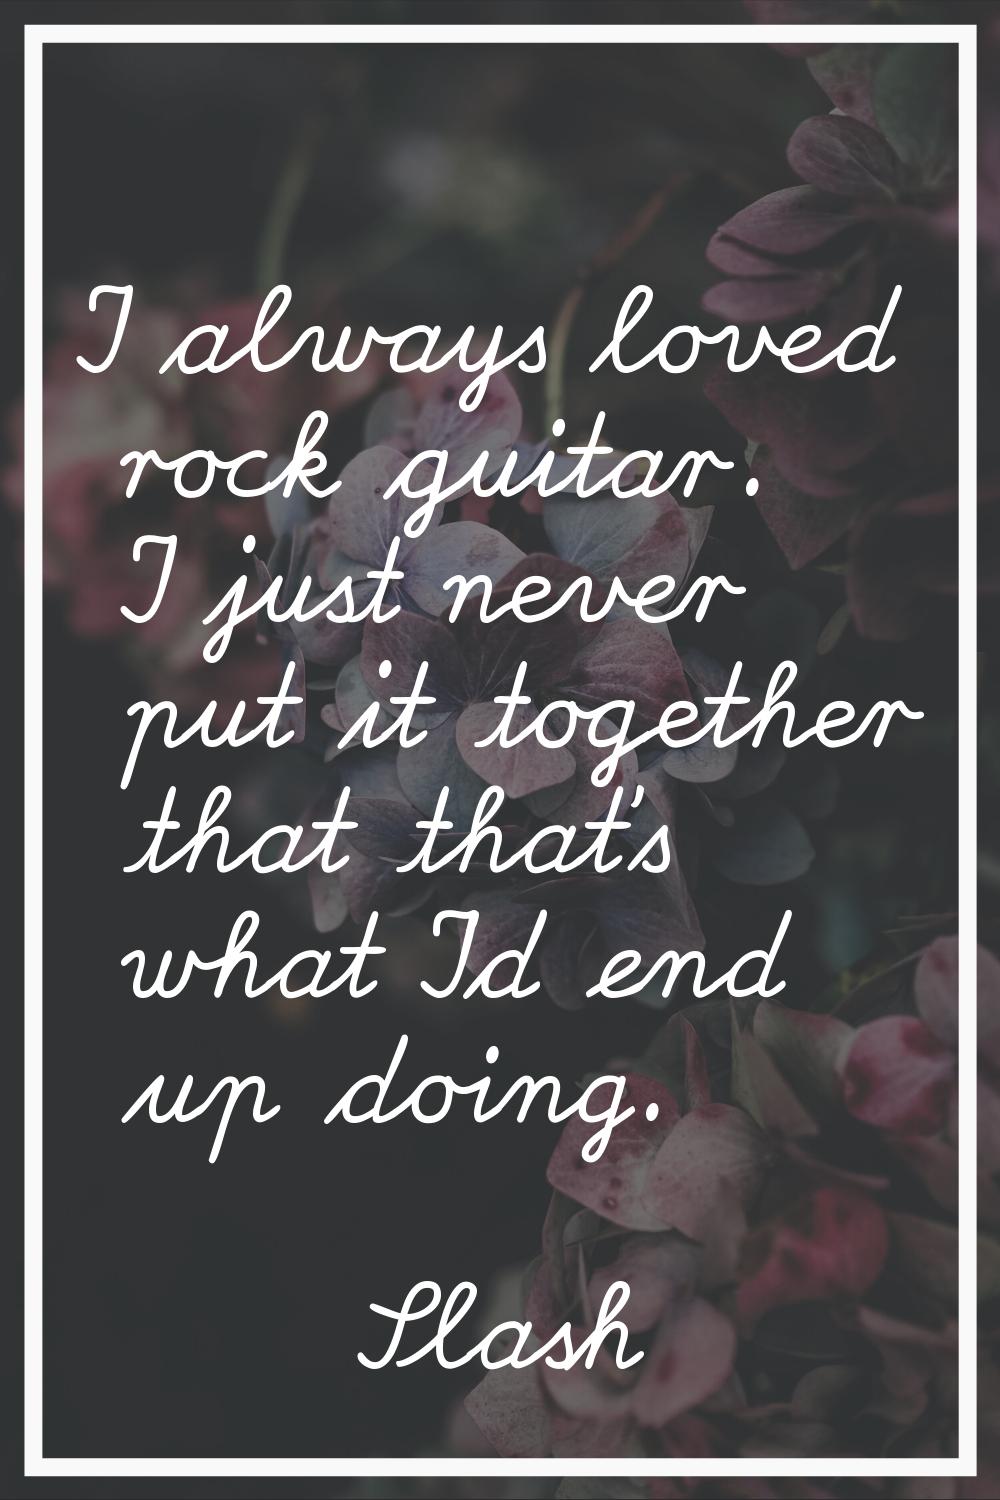 I always loved rock guitar. I just never put it together that that's what I'd end up doing.